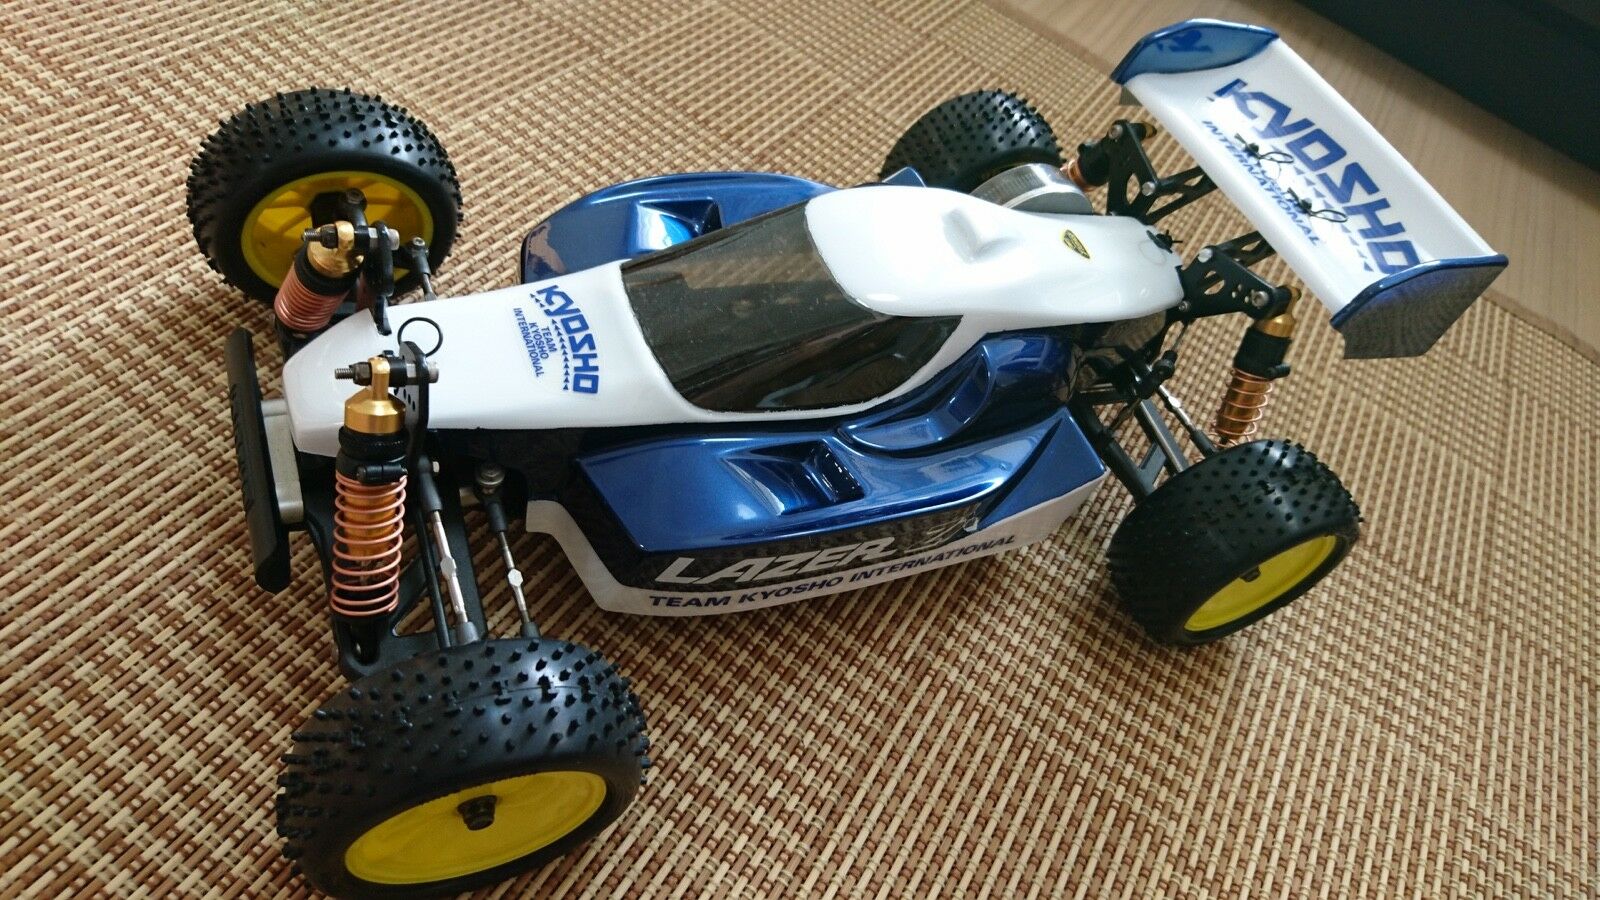 KYOSHO LAZER ZX BODY AND WING – Team Bluegroove